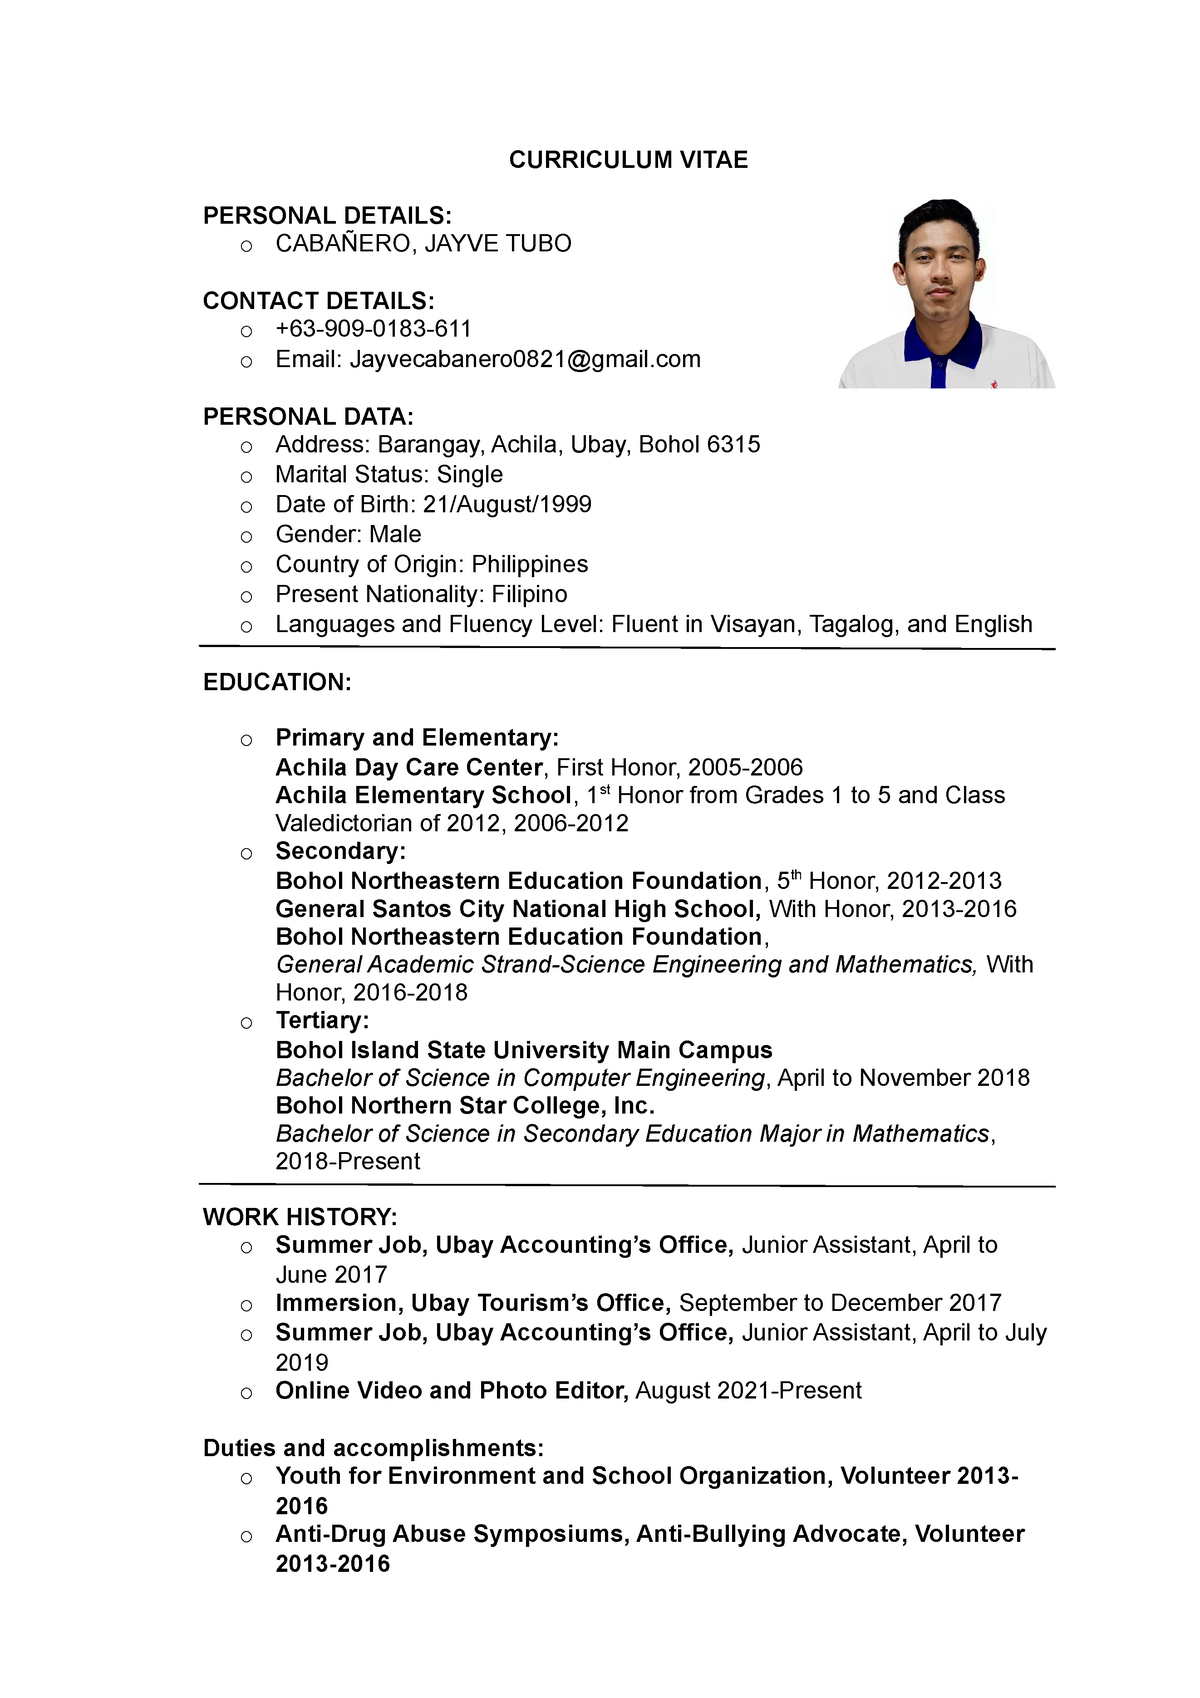 curriculum vitae examples for students research paper philippines